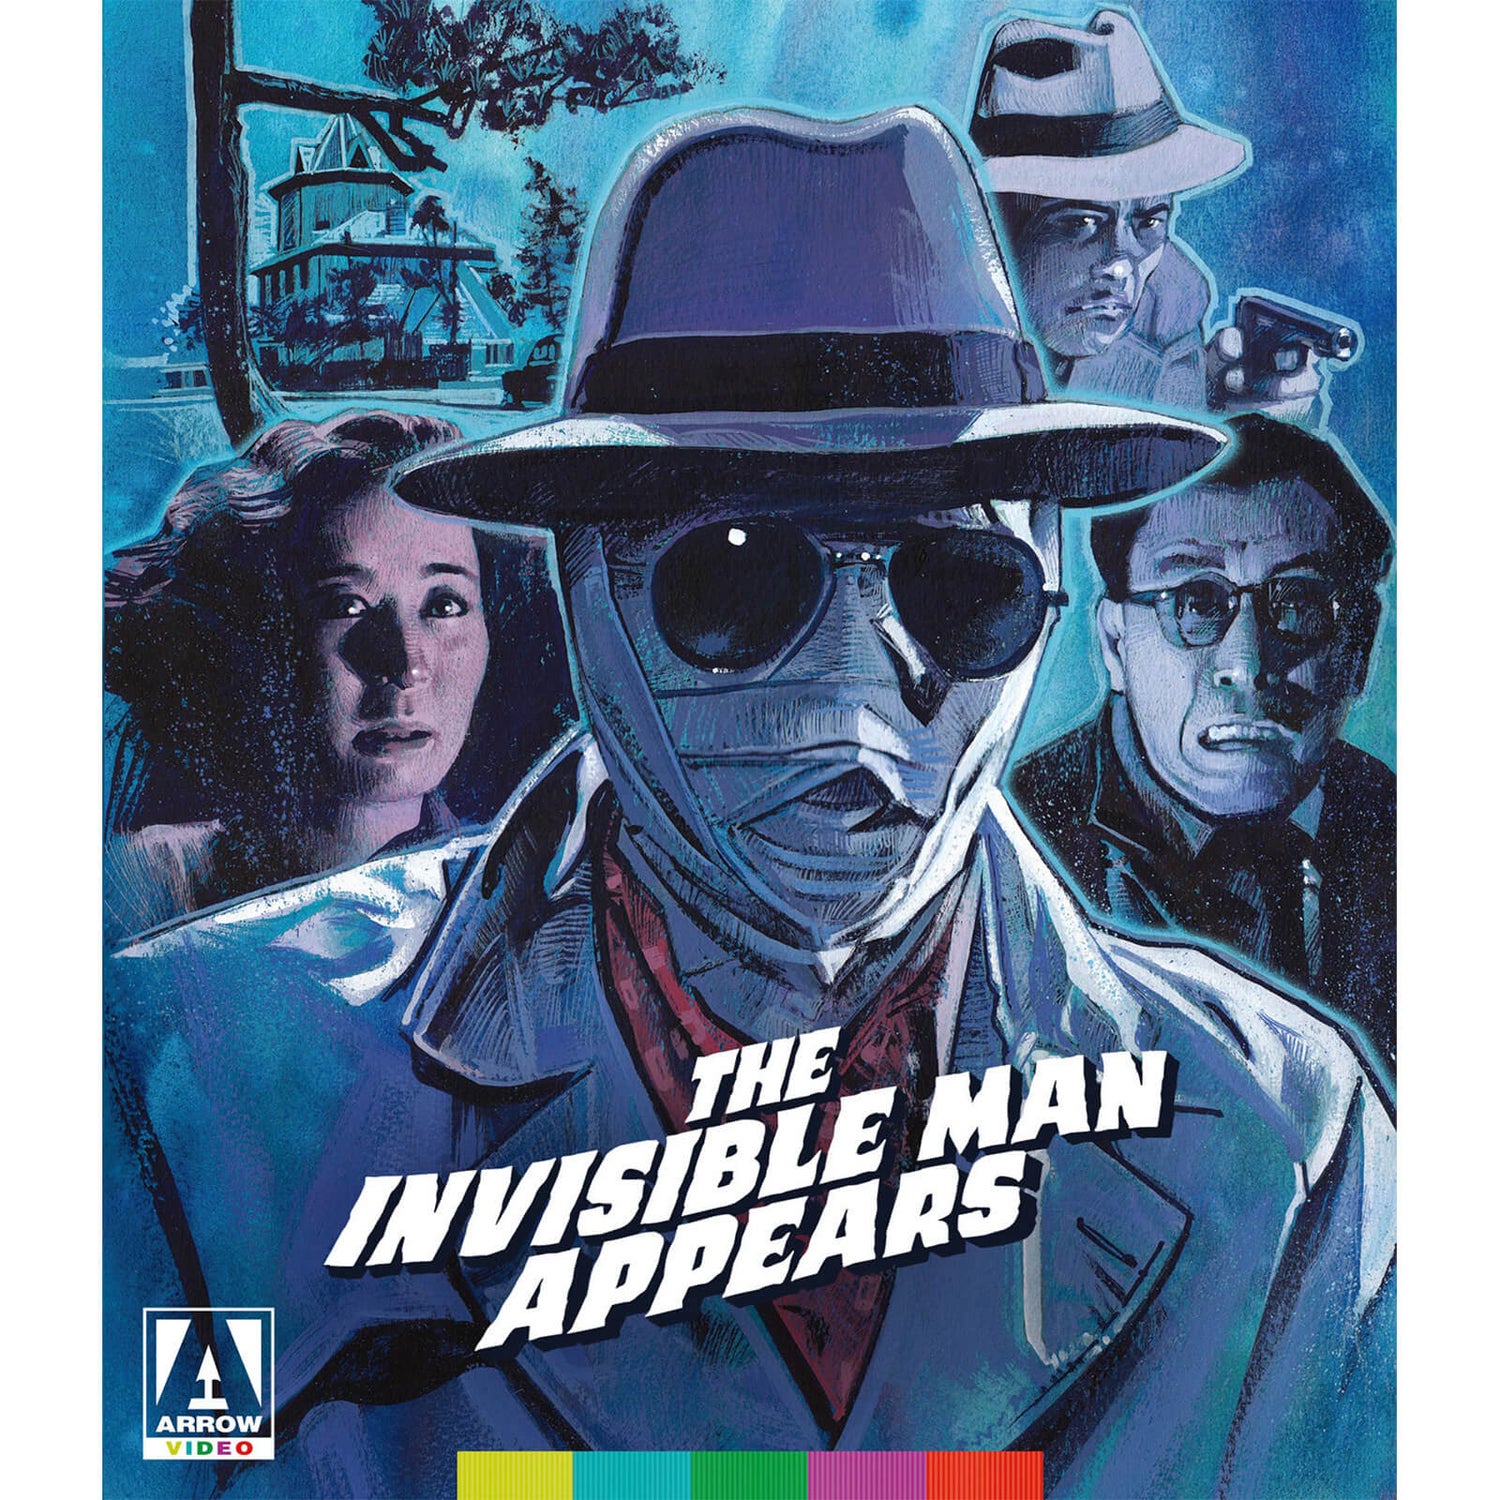 The Invisible Man Appears / The Invisible Man Vs. The Human Fly